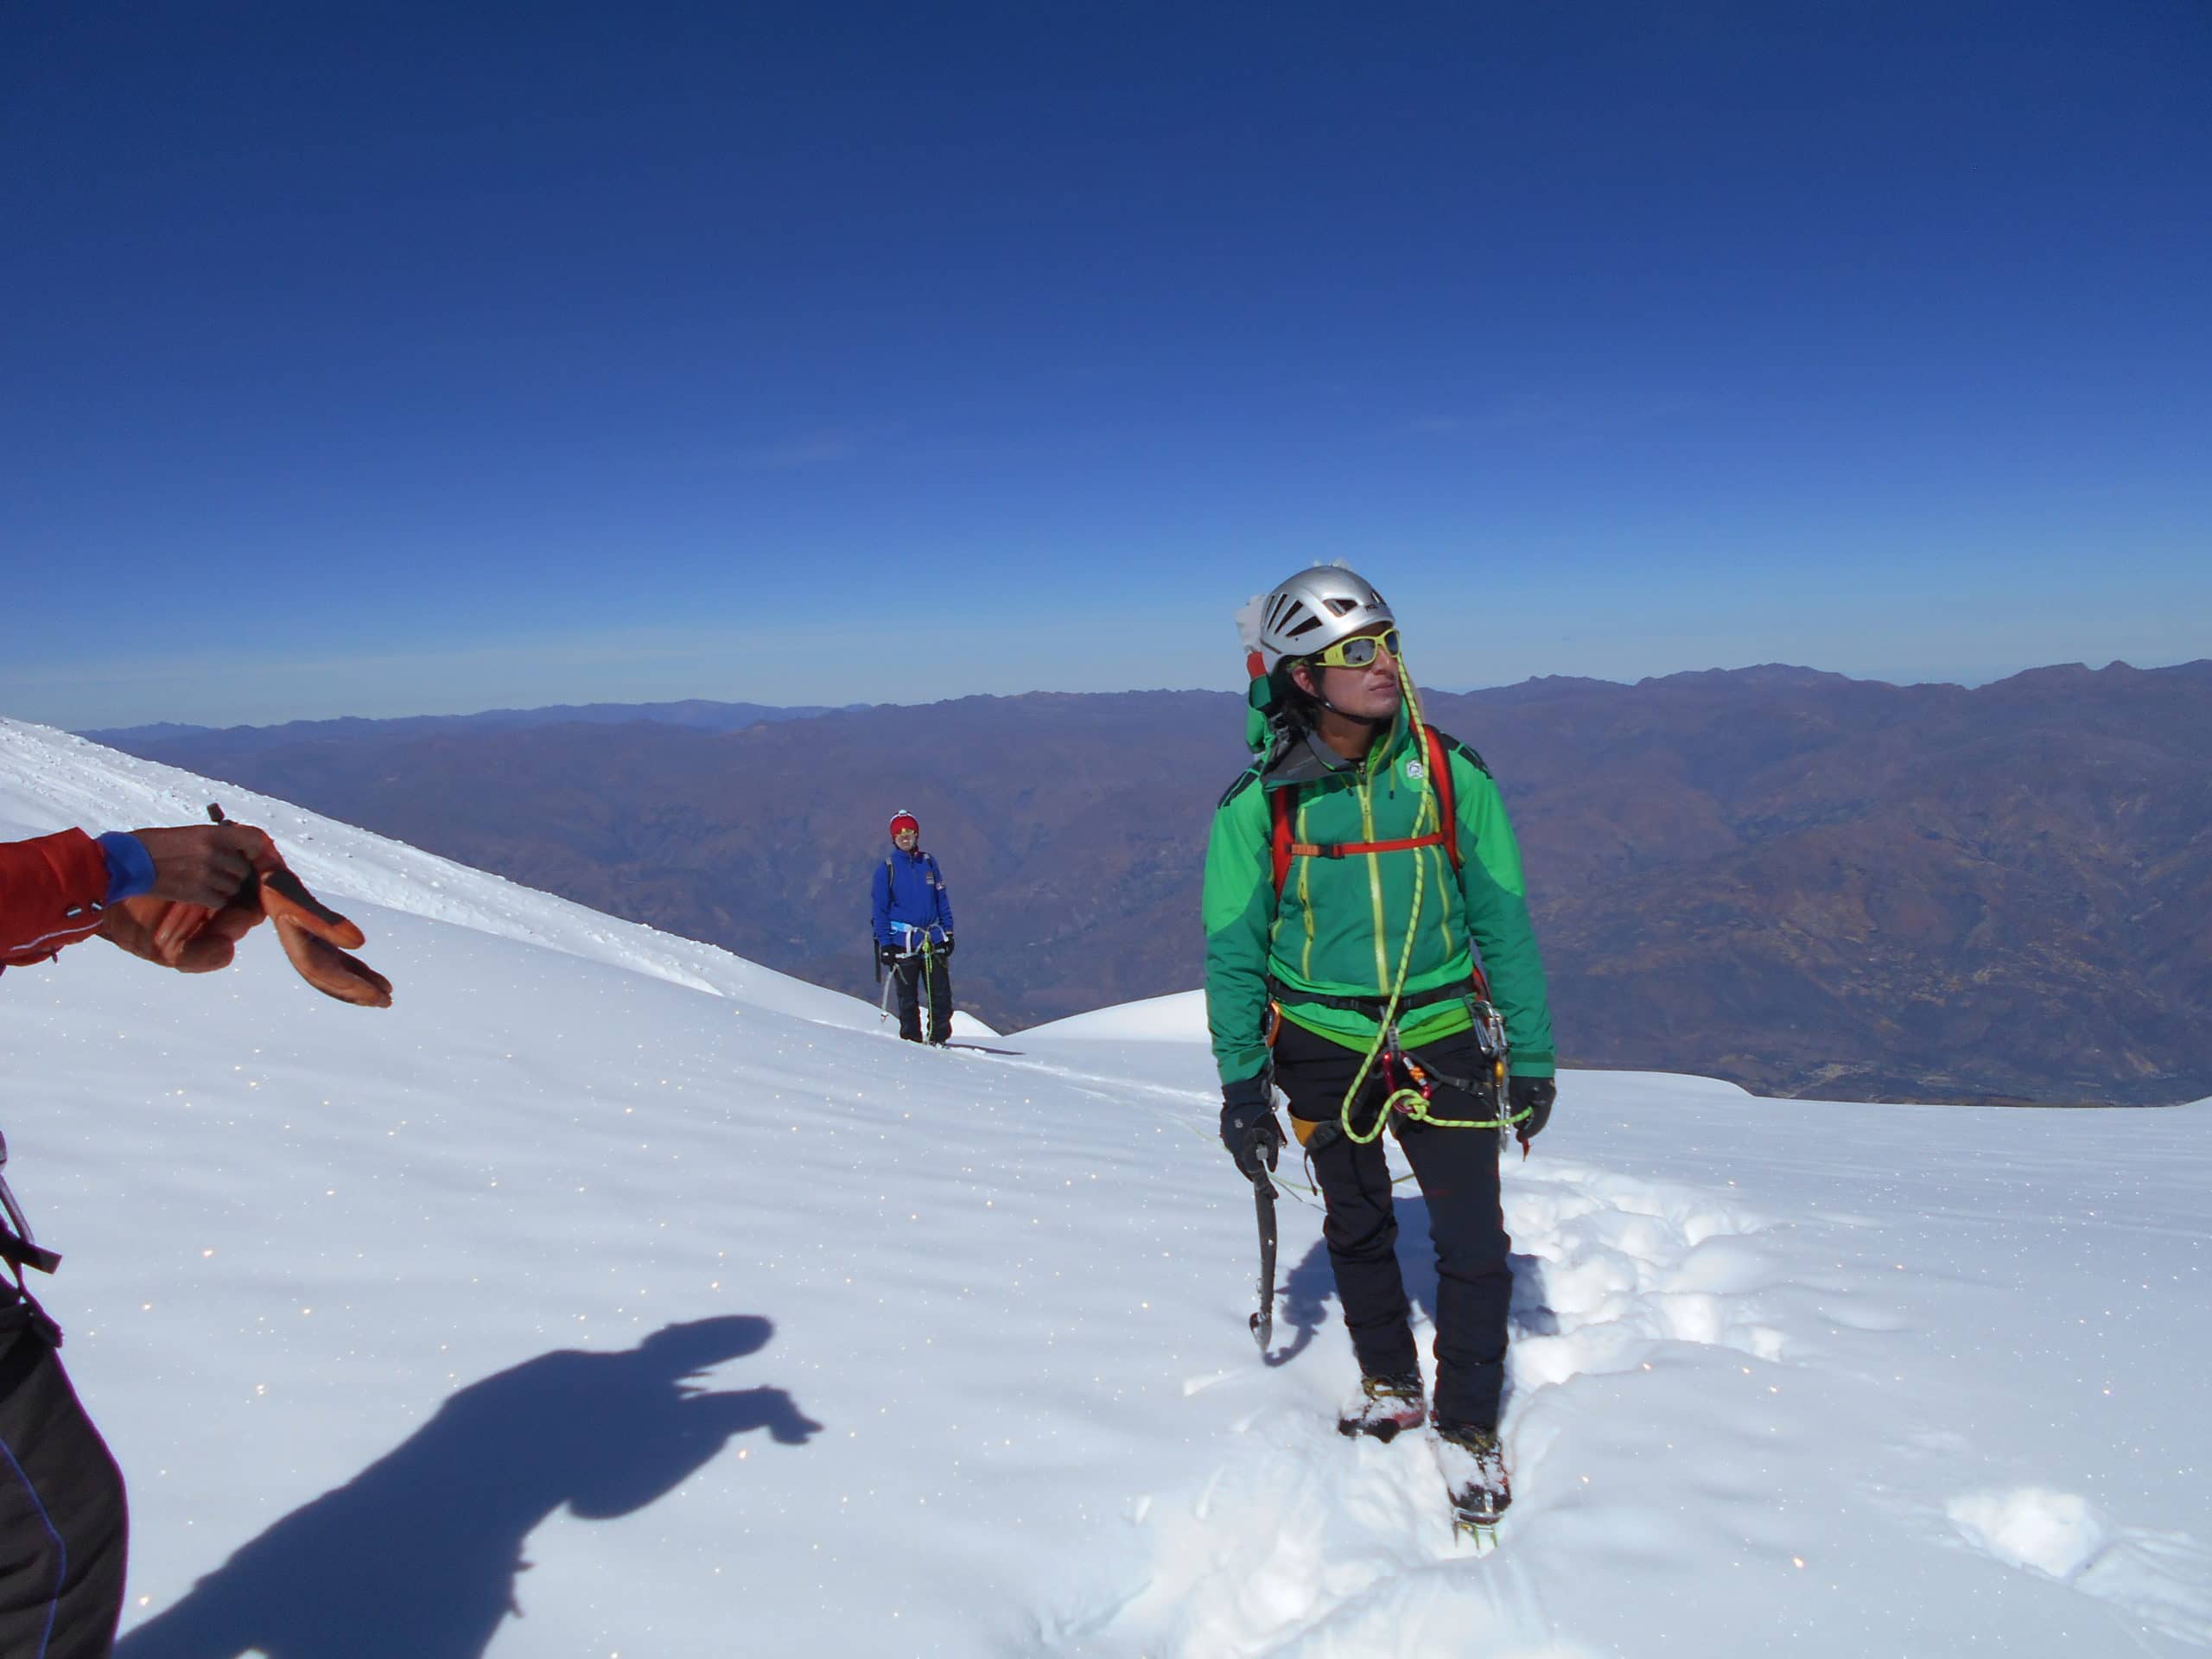 Meet our Mountaineering Guides